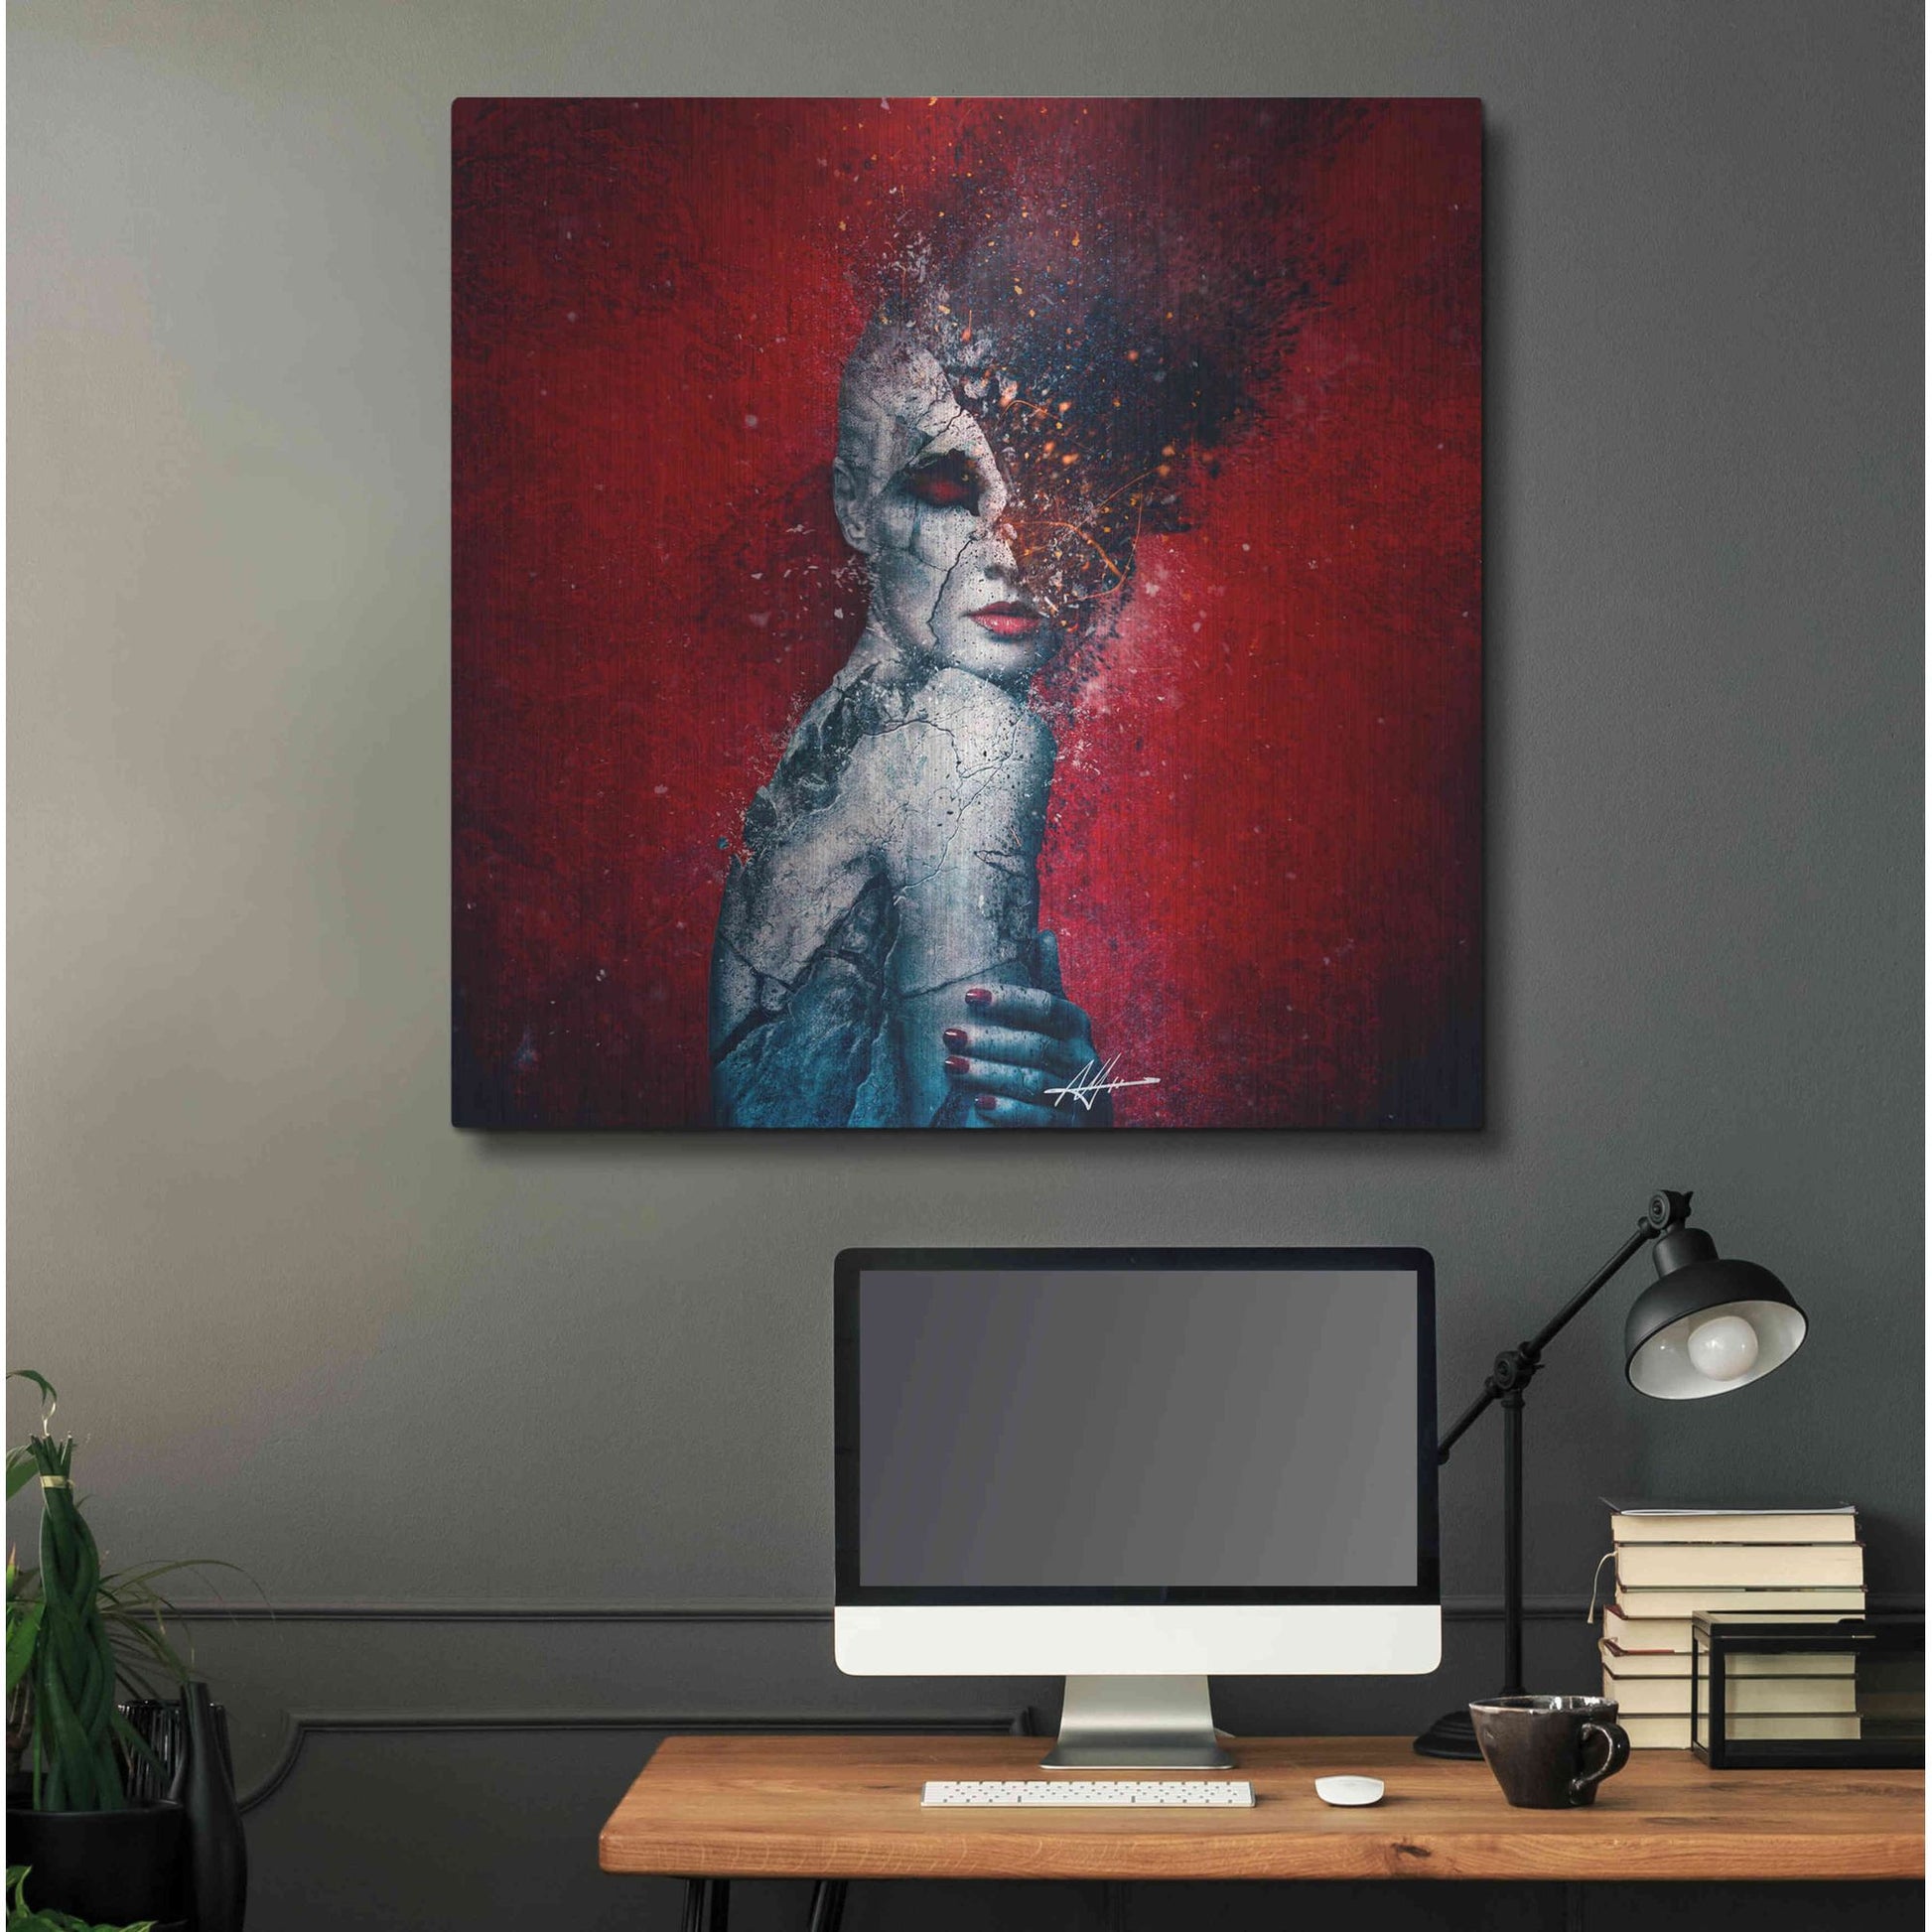 Luxe Metal Art 'Indifference' by Mario Sanchez Nevado, Metal Wall Art,36x36